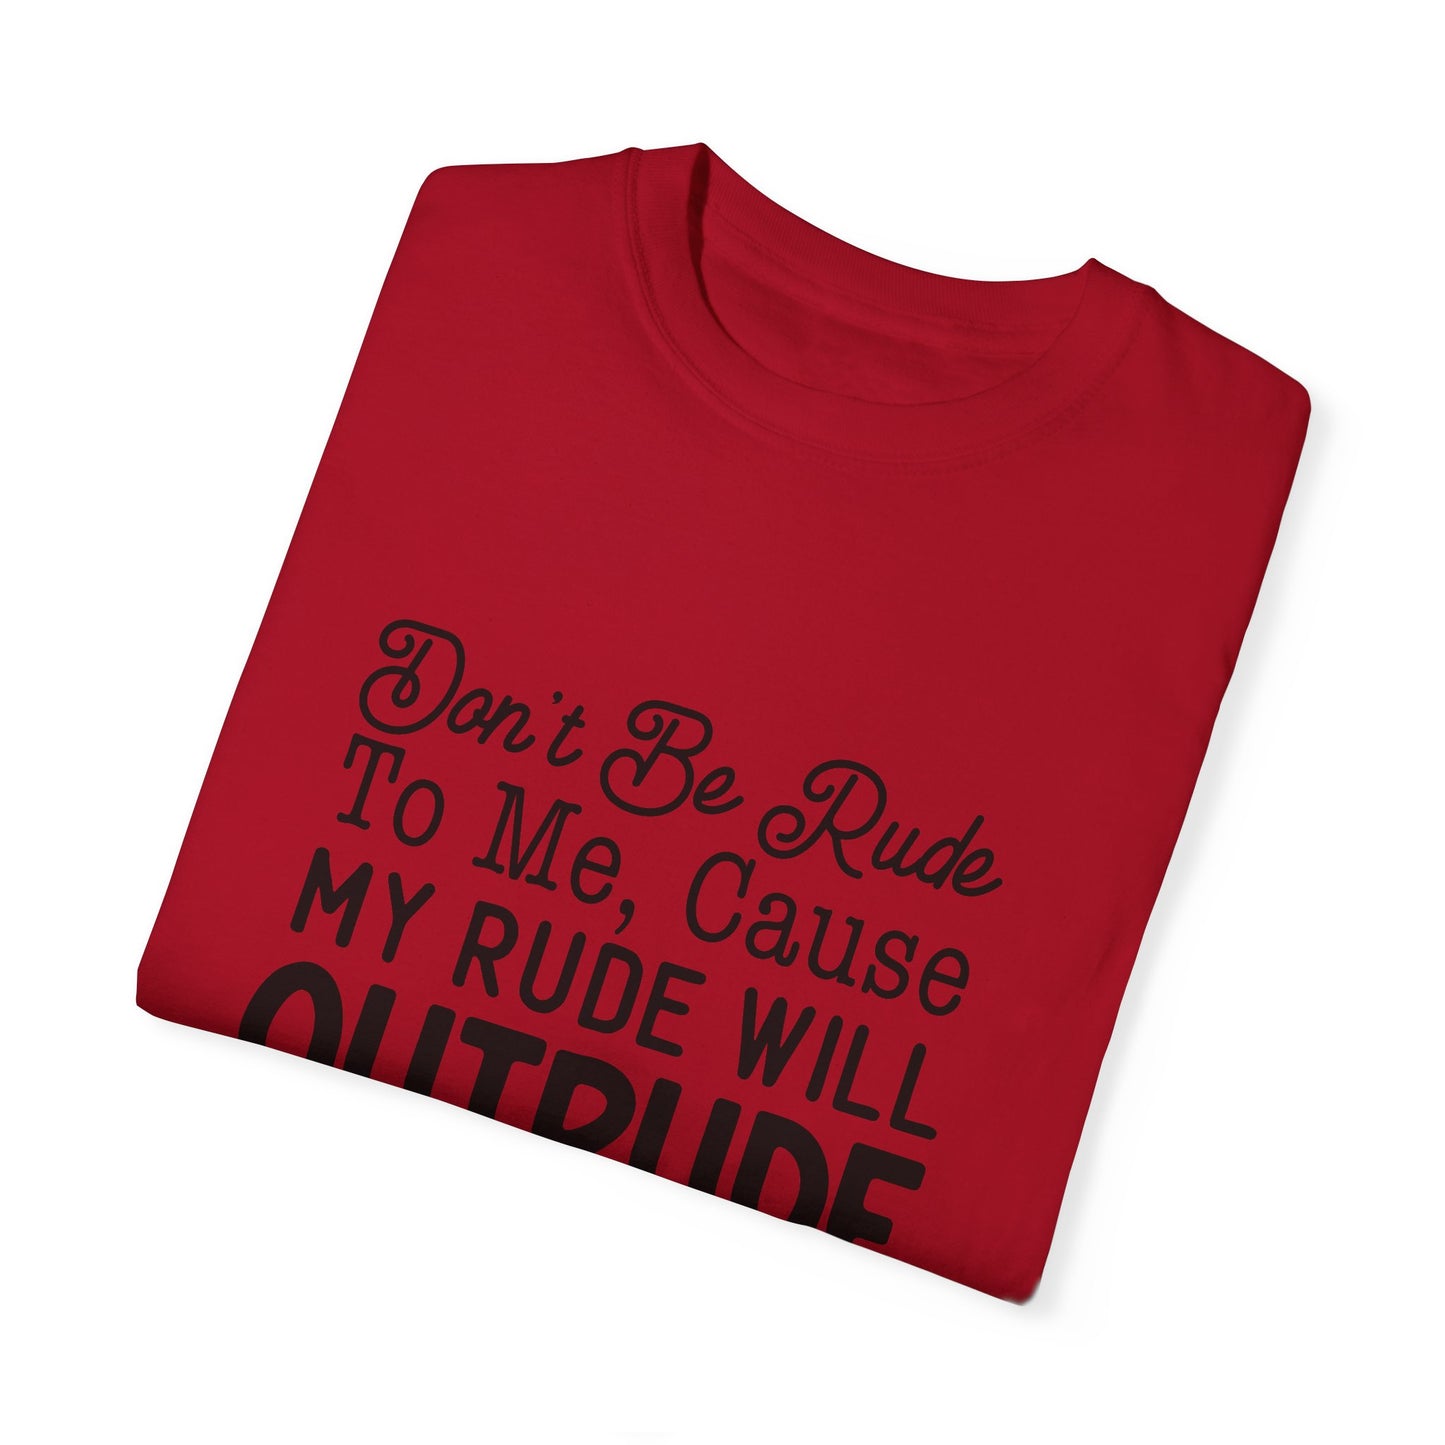 Don't be rude - Unisex Garment-Dyed T-shirt